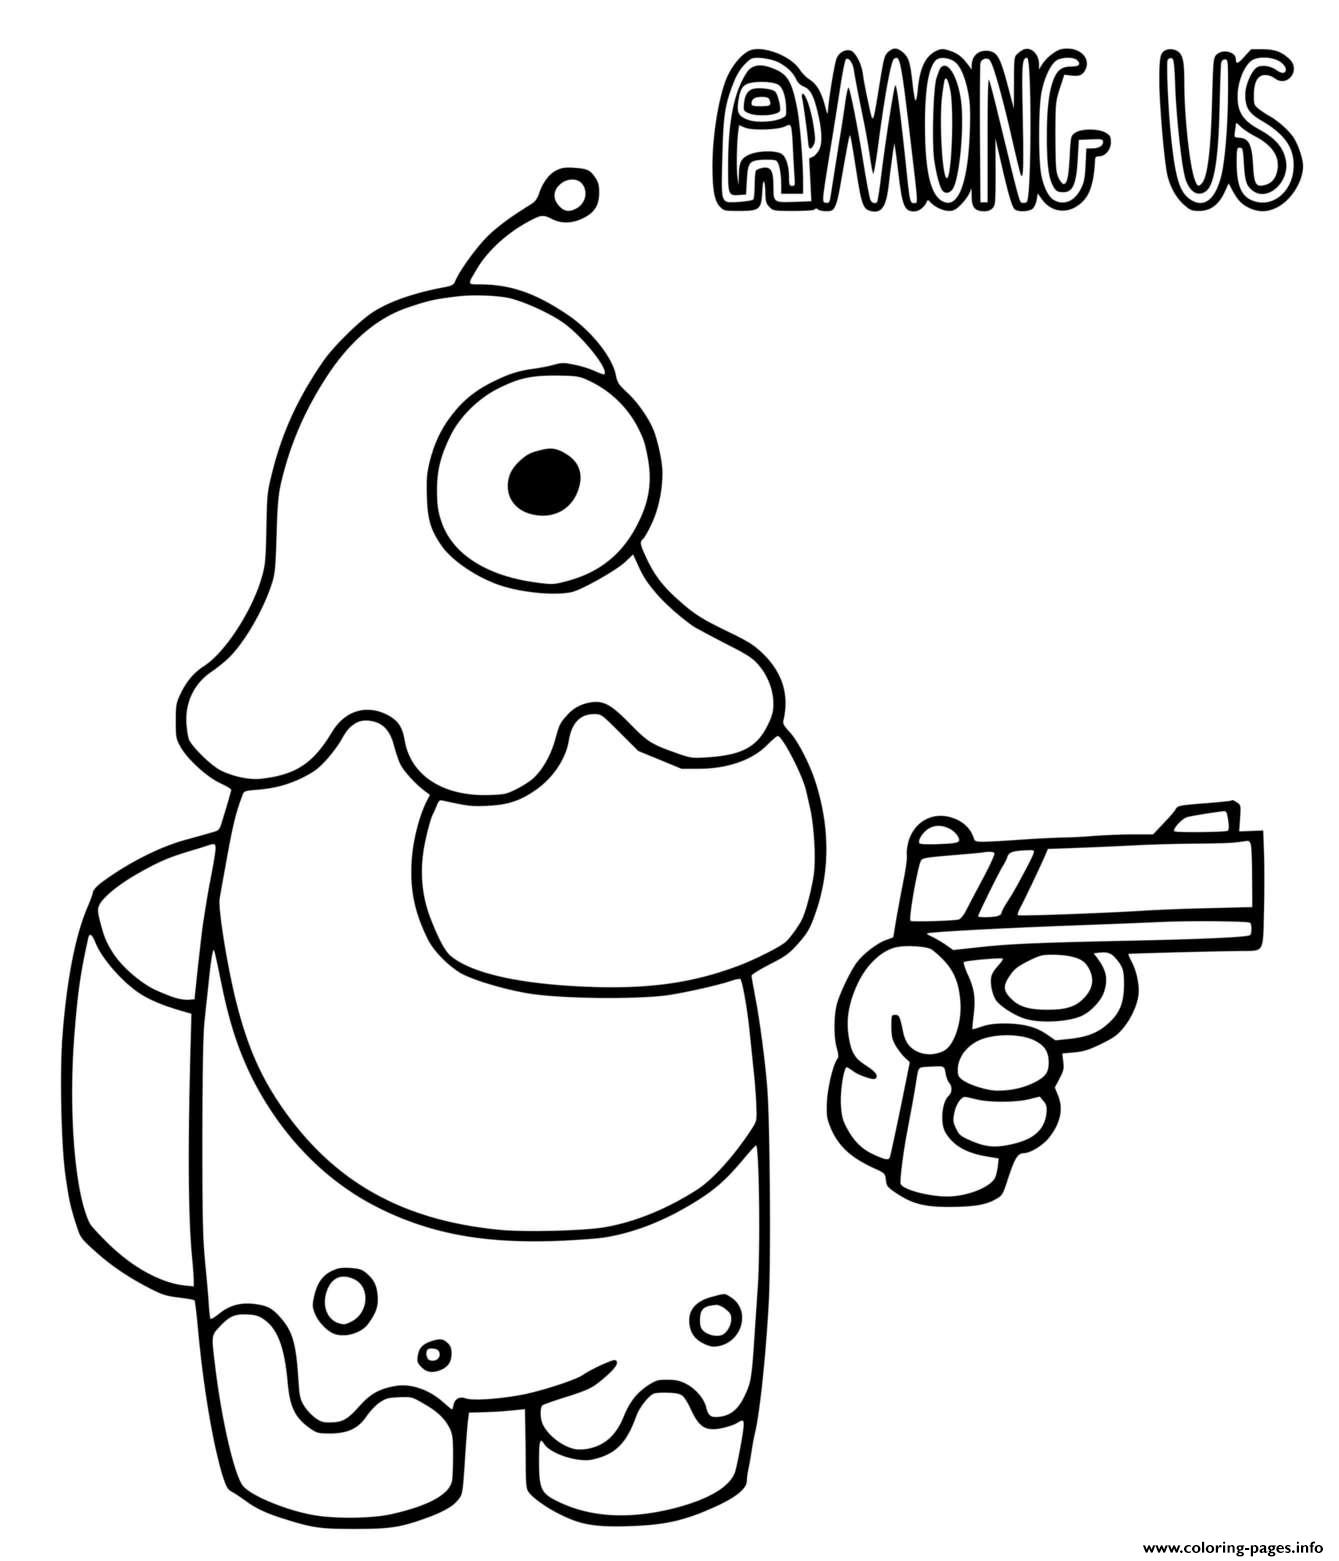 a traitor among us with a gun coloring pages printable